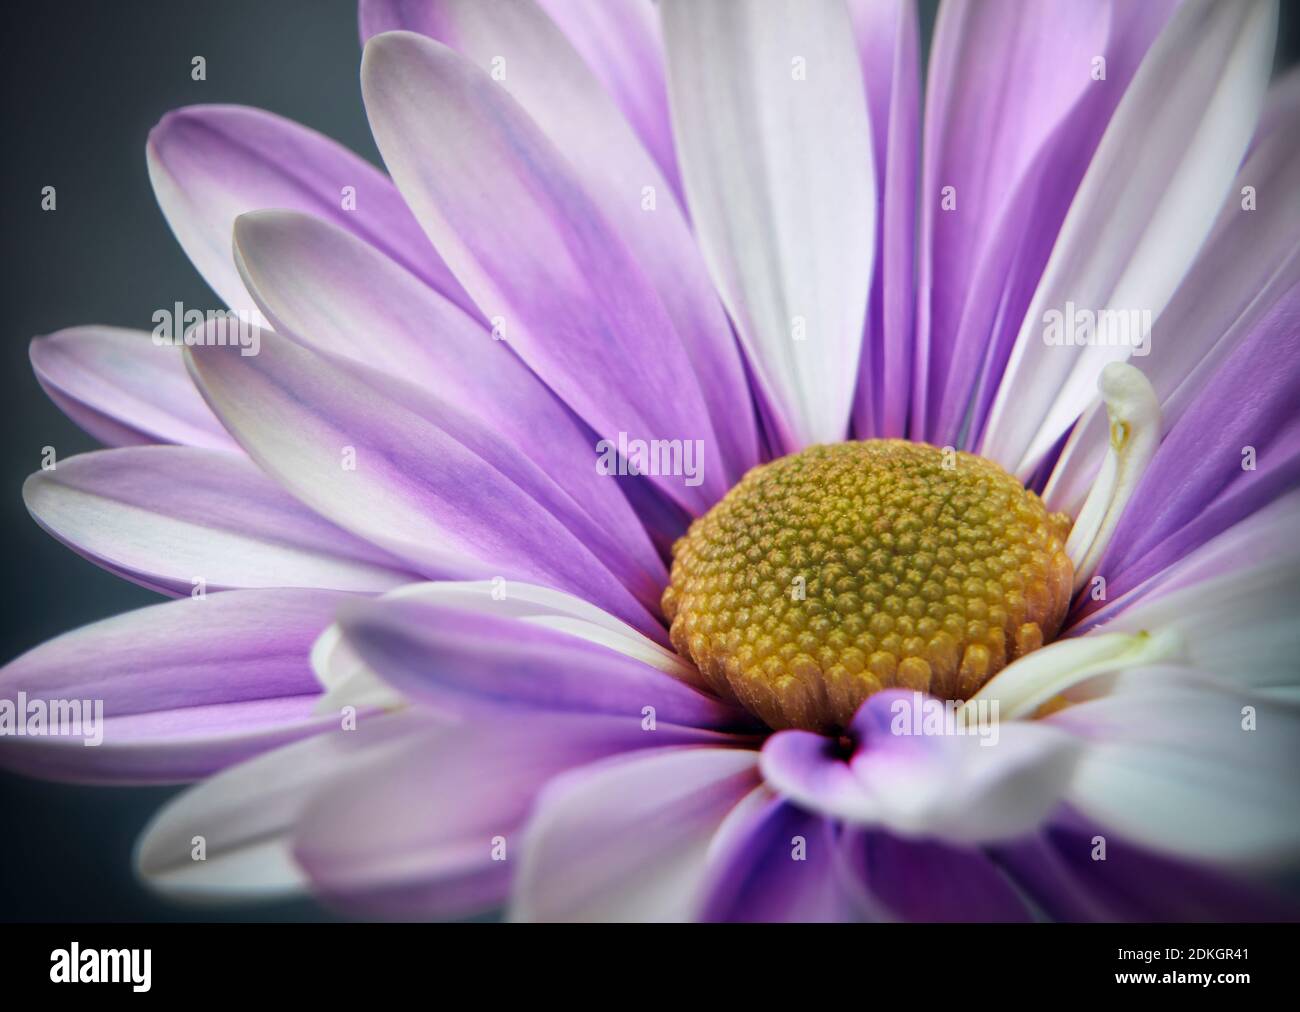 Close up photograph of purple daisy gerbera flower showing the stamen and petals Stock Photo